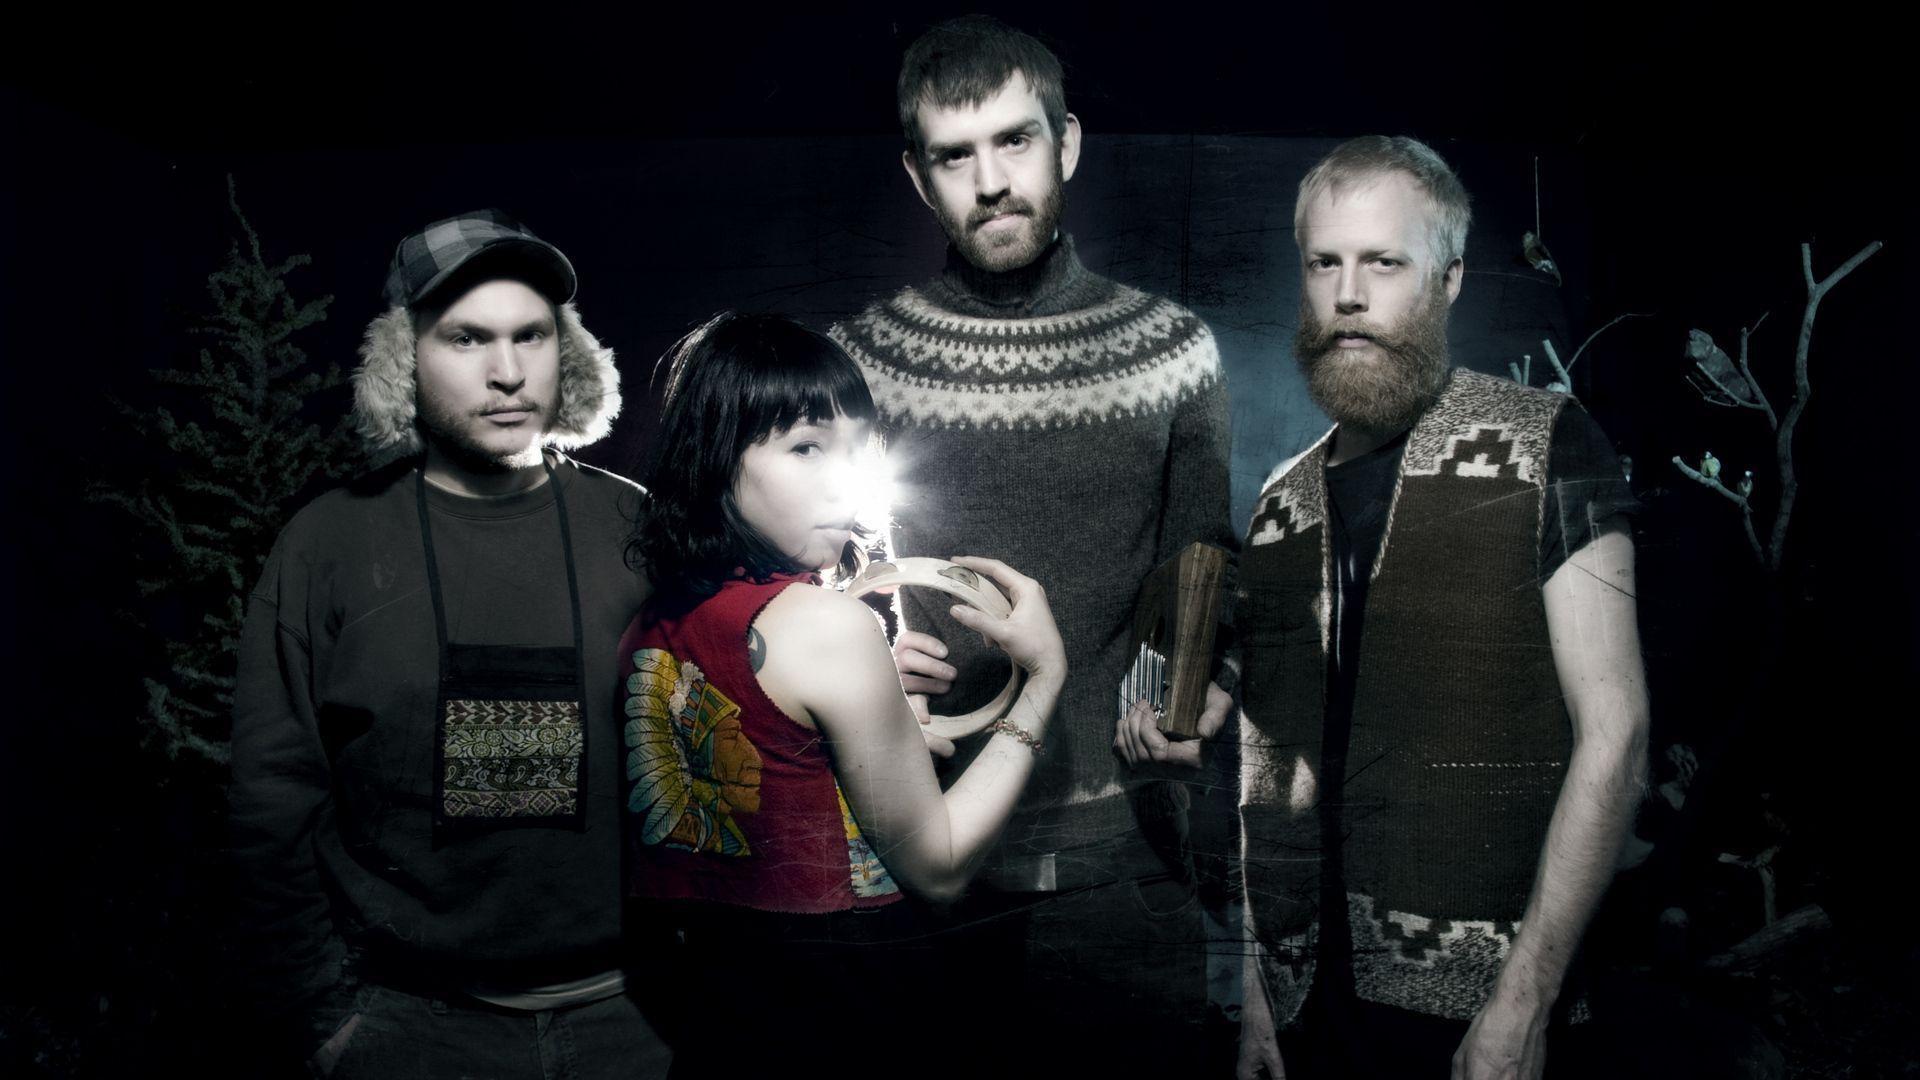 AllHipHop Watch the Official Video for Little Dragon&;s “Underbart”